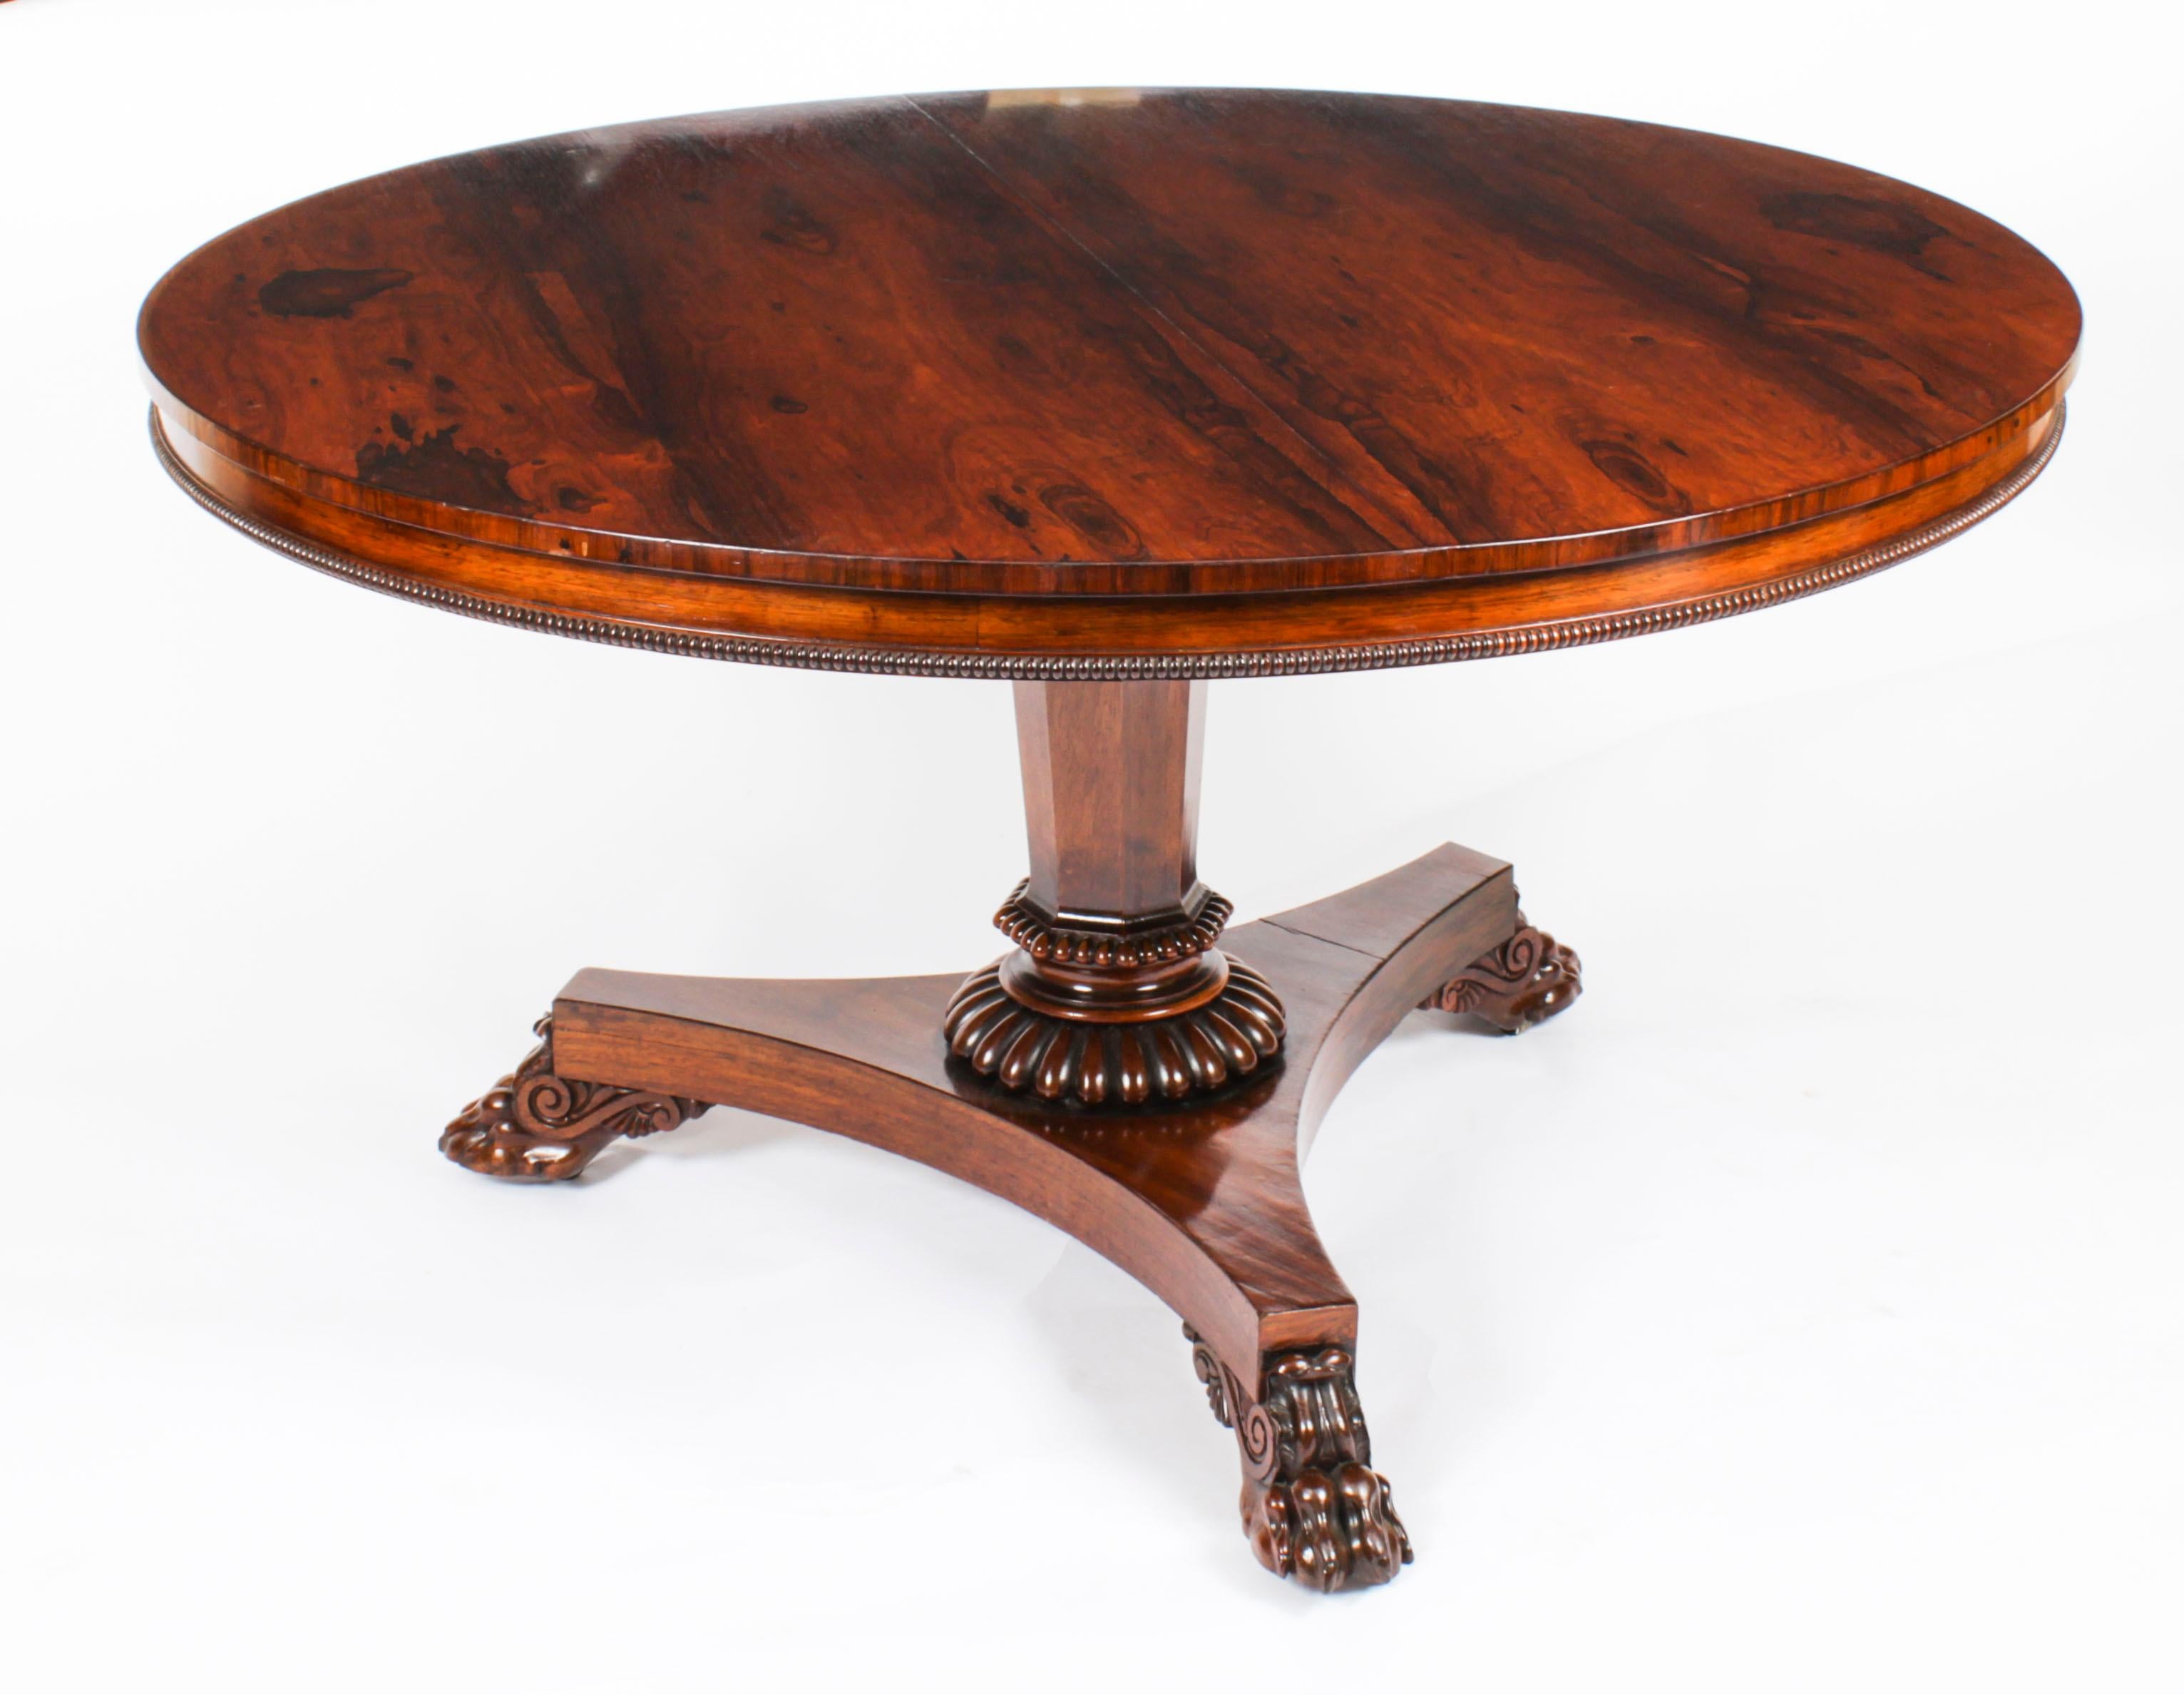 This is an elegant and rare English antique William IV Gonçalo Alves centre / breakfast table by the world renowned cabinet makers Gillows of Lancaster, circa 1830 in date. 
 
The tilt-top table in stunning Gonçalo Alves, having stunning grain to